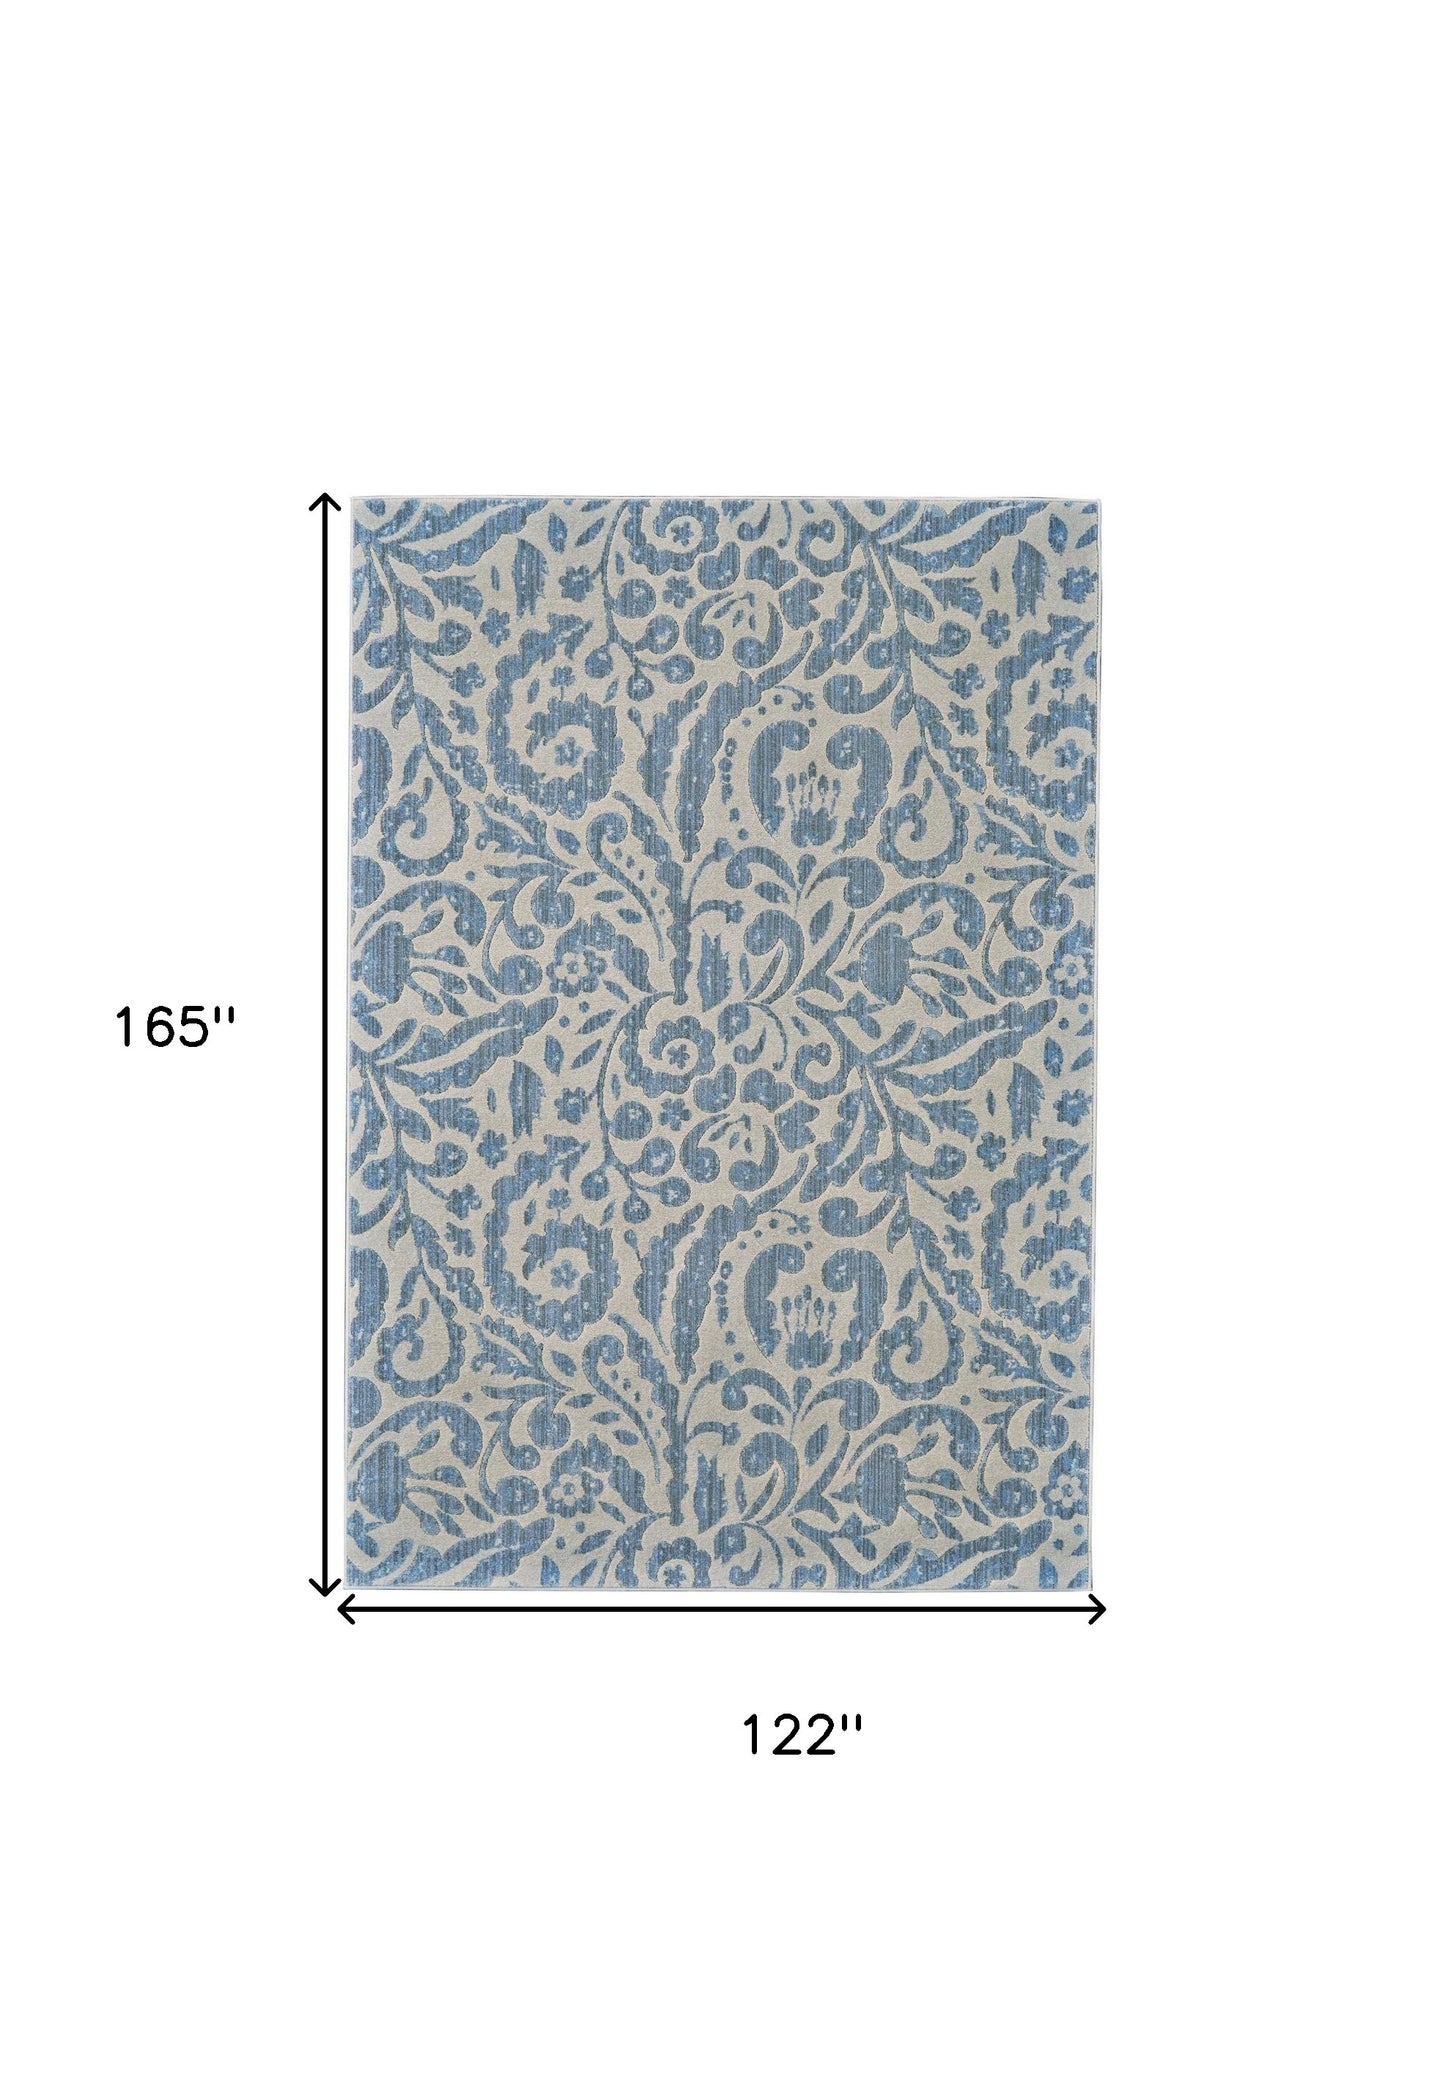 2' X 4' Blue Ivory And Tan Floral Distressed Stain Resistant Area Rug